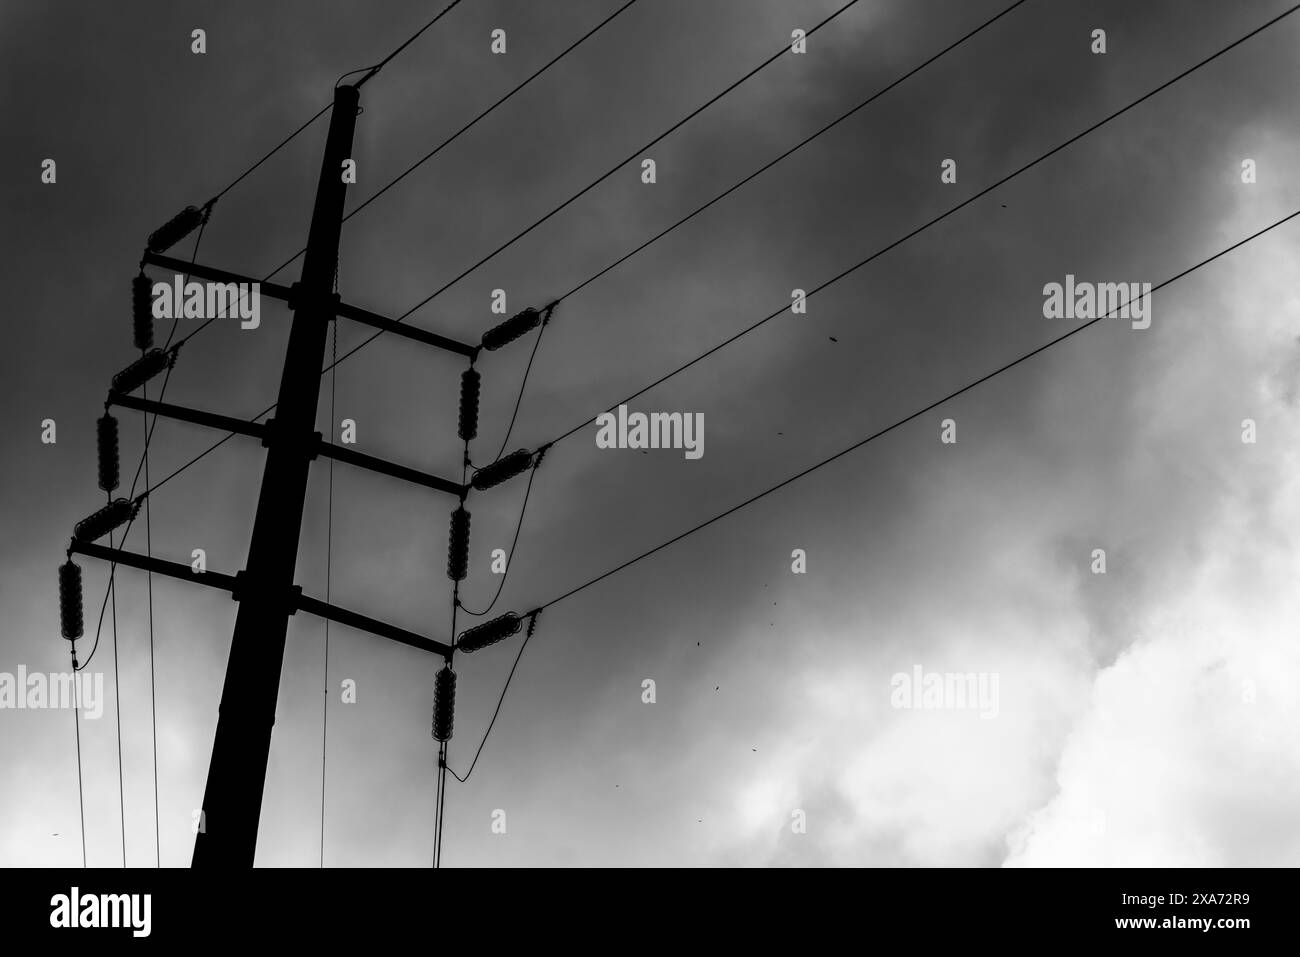 Monochrome image of power lines and telephone poles contrasting with a cloudy sky Stock Photo